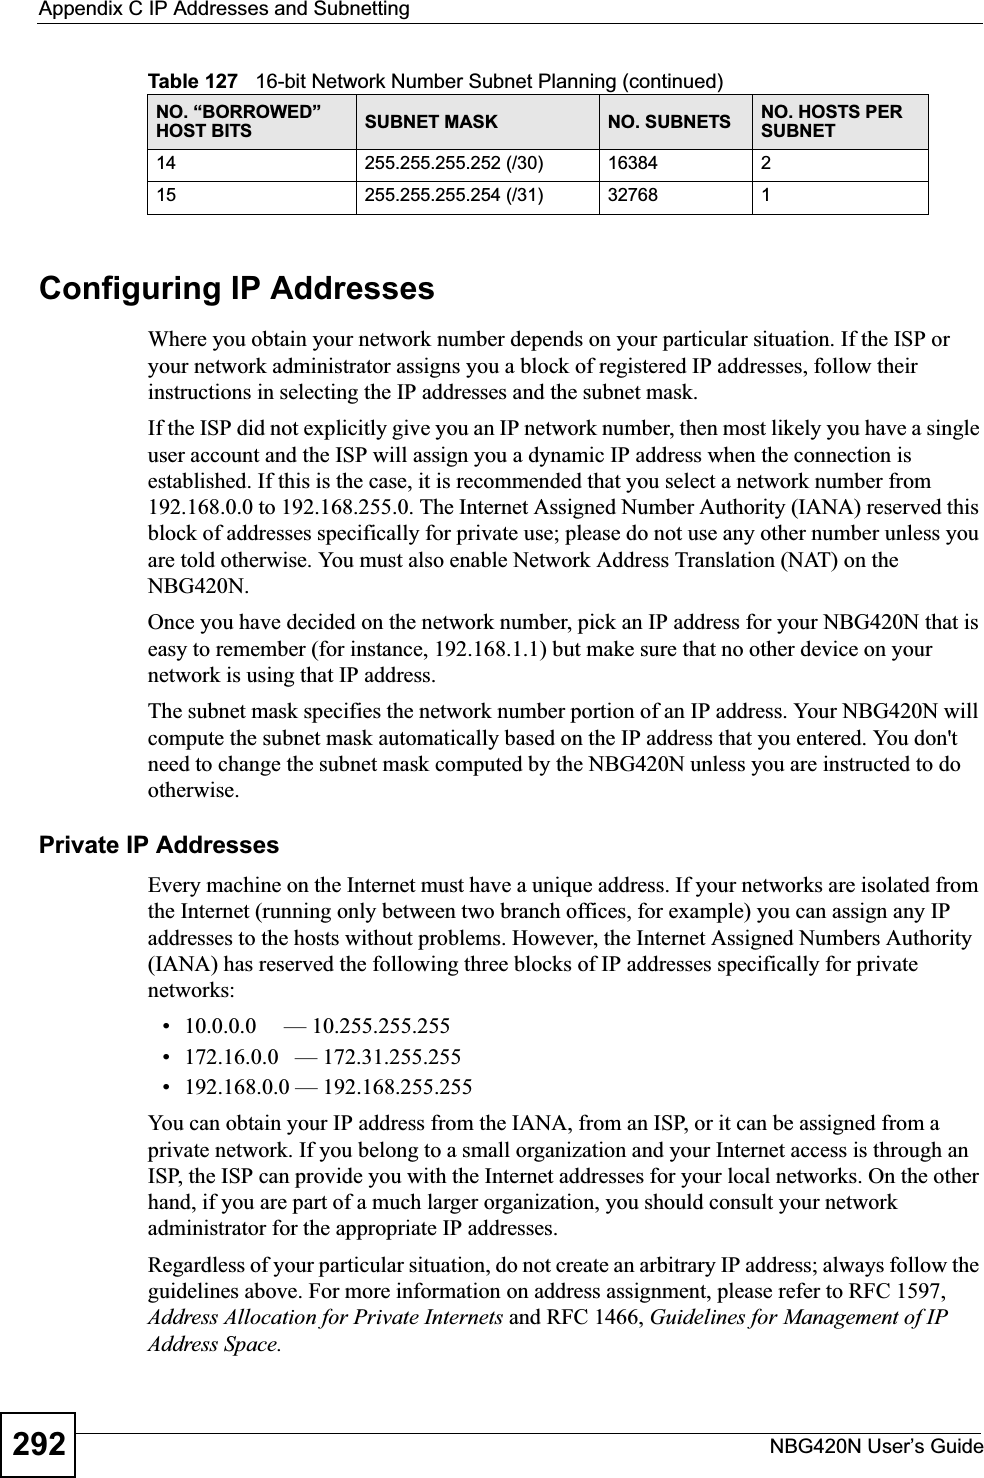 Appendix C IP Addresses and SubnettingNBG420N User’s Guide292Configuring IP AddressesWhere you obtain your network number depends on your particular situation. If the ISP or your network administrator assigns you a block of registered IP addresses, follow their instructions in selecting the IP addresses and the subnet mask.If the ISP did not explicitly give you an IP network number, then most likely you have a single user account and the ISP will assign you a dynamic IP address when the connection is established. If this is the case, it is recommended that you select a network number from 192.168.0.0 to 192.168.255.0. The Internet Assigned Number Authority (IANA) reserved this block of addresses specifically for private use; please do not use any other number unless you are told otherwise. You must also enable Network Address Translation (NAT) on the NBG420N.Once you have decided on the network number, pick an IP address for your NBG420N that is easy to remember (for instance, 192.168.1.1) but make sure that no other device on your network is using that IP address.The subnet mask specifies the network number portion of an IP address. Your NBG420N will compute the subnet mask automatically based on the IP address that you entered. You don&apos;t need to change the subnet mask computed by the NBG420N unless you are instructed to do otherwise.Private IP AddressesEvery machine on the Internet must have a unique address. If your networks are isolated from the Internet (running only between two branch offices, for example) you can assign any IP addresses to the hosts without problems. However, the Internet Assigned Numbers Authority (IANA) has reserved the following three blocks of IP addresses specifically for private networks:• 10.0.0.0     — 10.255.255.255• 172.16.0.0   — 172.31.255.255• 192.168.0.0 — 192.168.255.255You can obtain your IP address from the IANA, from an ISP, or it can be assigned from a private network. If you belong to a small organization and your Internet access is through an ISP, the ISP can provide you with the Internet addresses for your local networks. On the other hand, if you are part of a much larger organization, you should consult your network administrator for the appropriate IP addresses.Regardless of your particular situation, do not create an arbitrary IP address; always follow the guidelines above. For more information on address assignment, please refer to RFC 1597, Address Allocation for Private Internets and RFC 1466, Guidelines for Management of IP Address Space.14 255.255.255.252 (/30) 16384 215 255.255.255.254 (/31) 32768 1Table 127   16-bit Network Number Subnet Planning (continued)NO. “BORROWED” HOST BITS SUBNET MASK NO. SUBNETS NO. HOSTS PER SUBNET